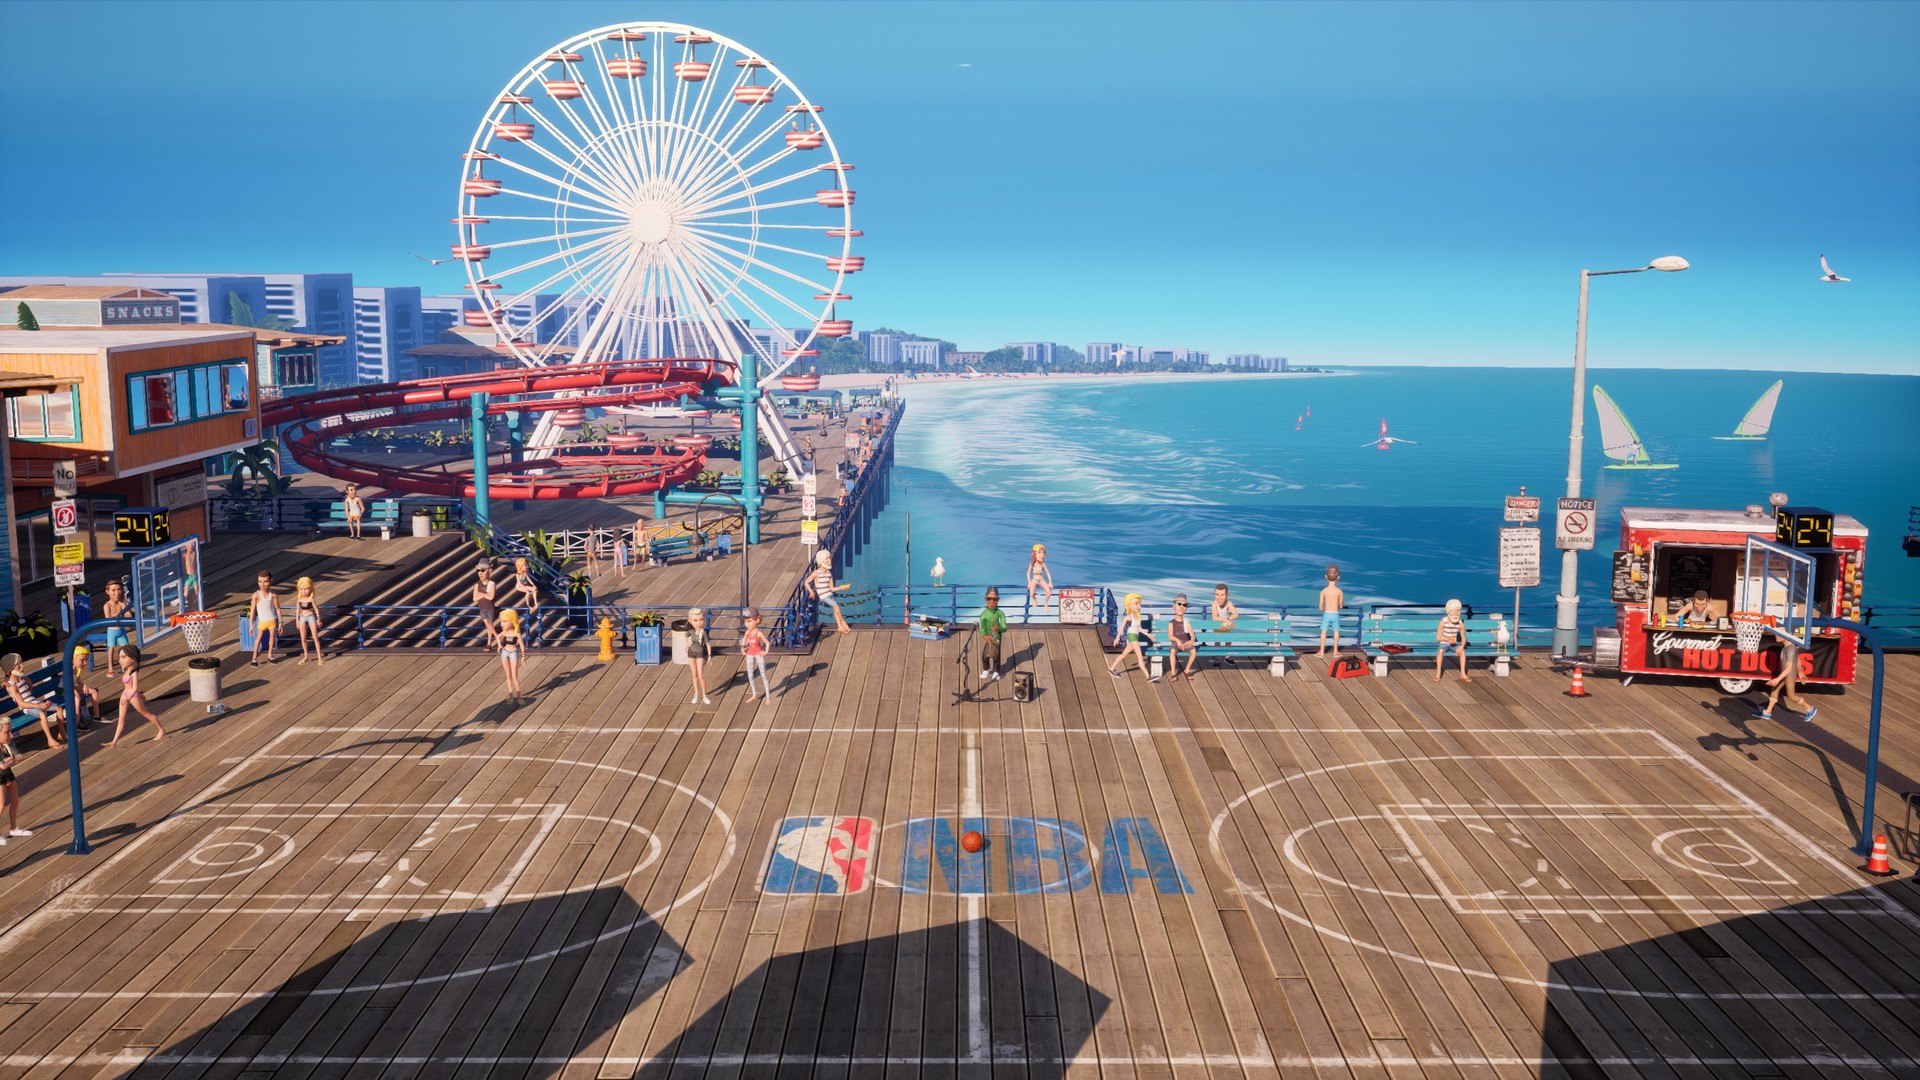 NBA 2K Playgrounds 2 on Steam